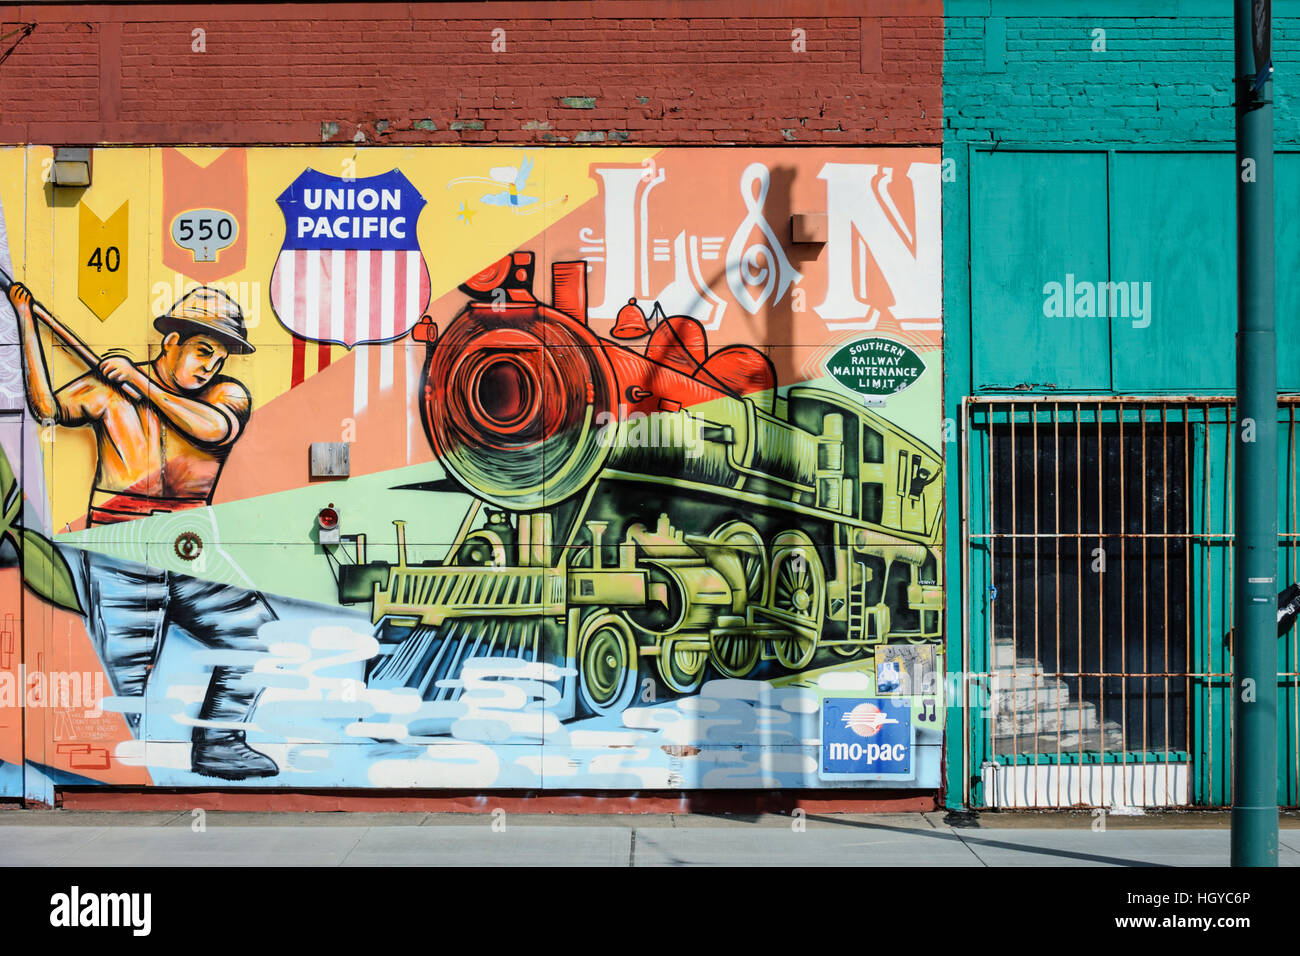 Mural painting celebrating the railroad history, Memphis, Tennessee, USA Stock Photo